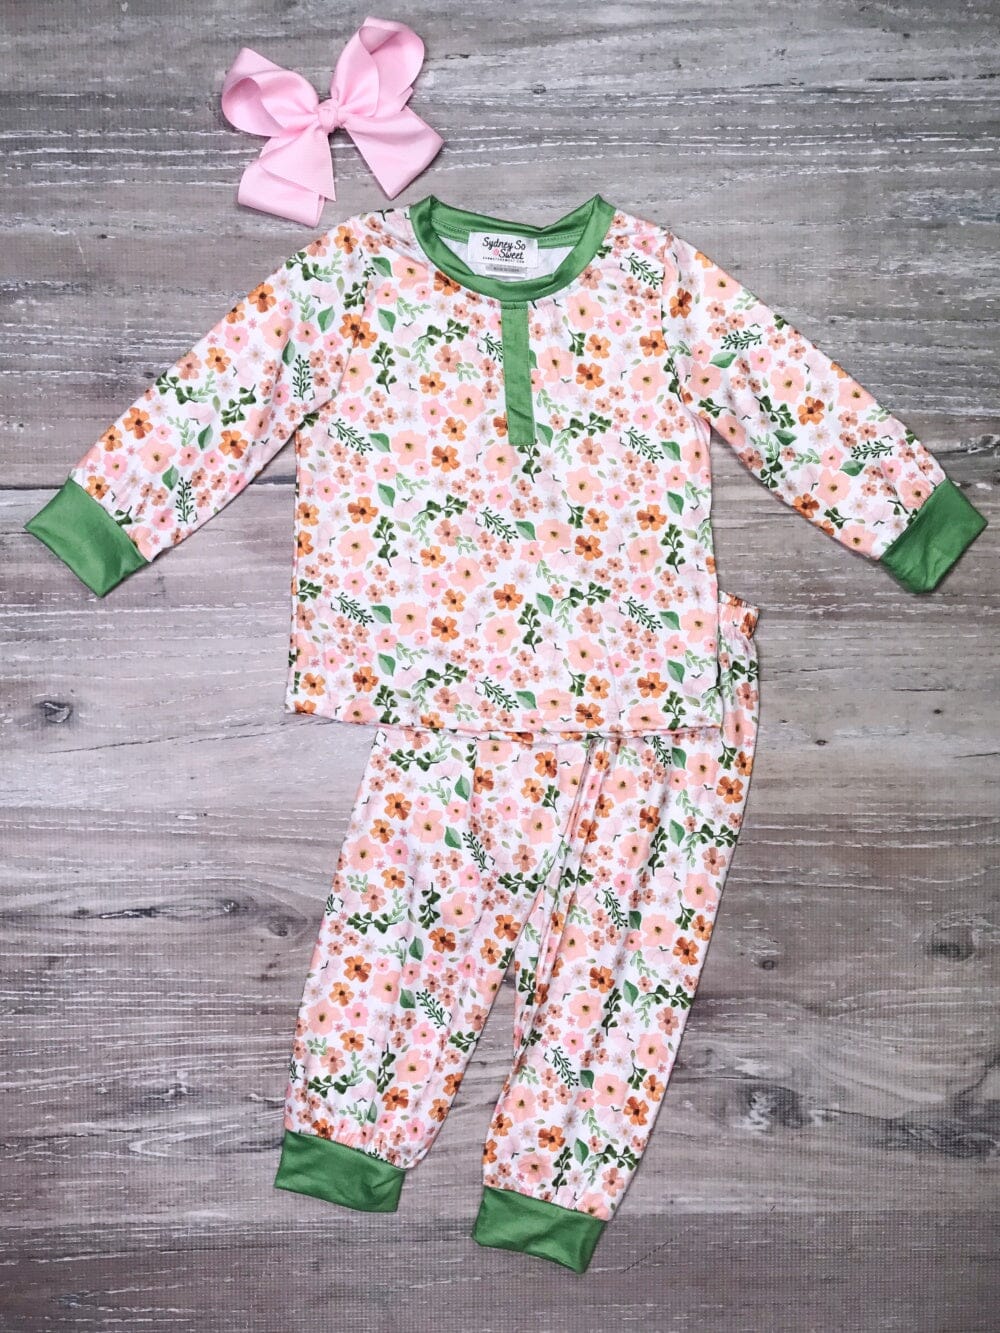 Green & Pink Ditsy Floral Girls Long Sleeve Pajamas - Sydney So Sweet